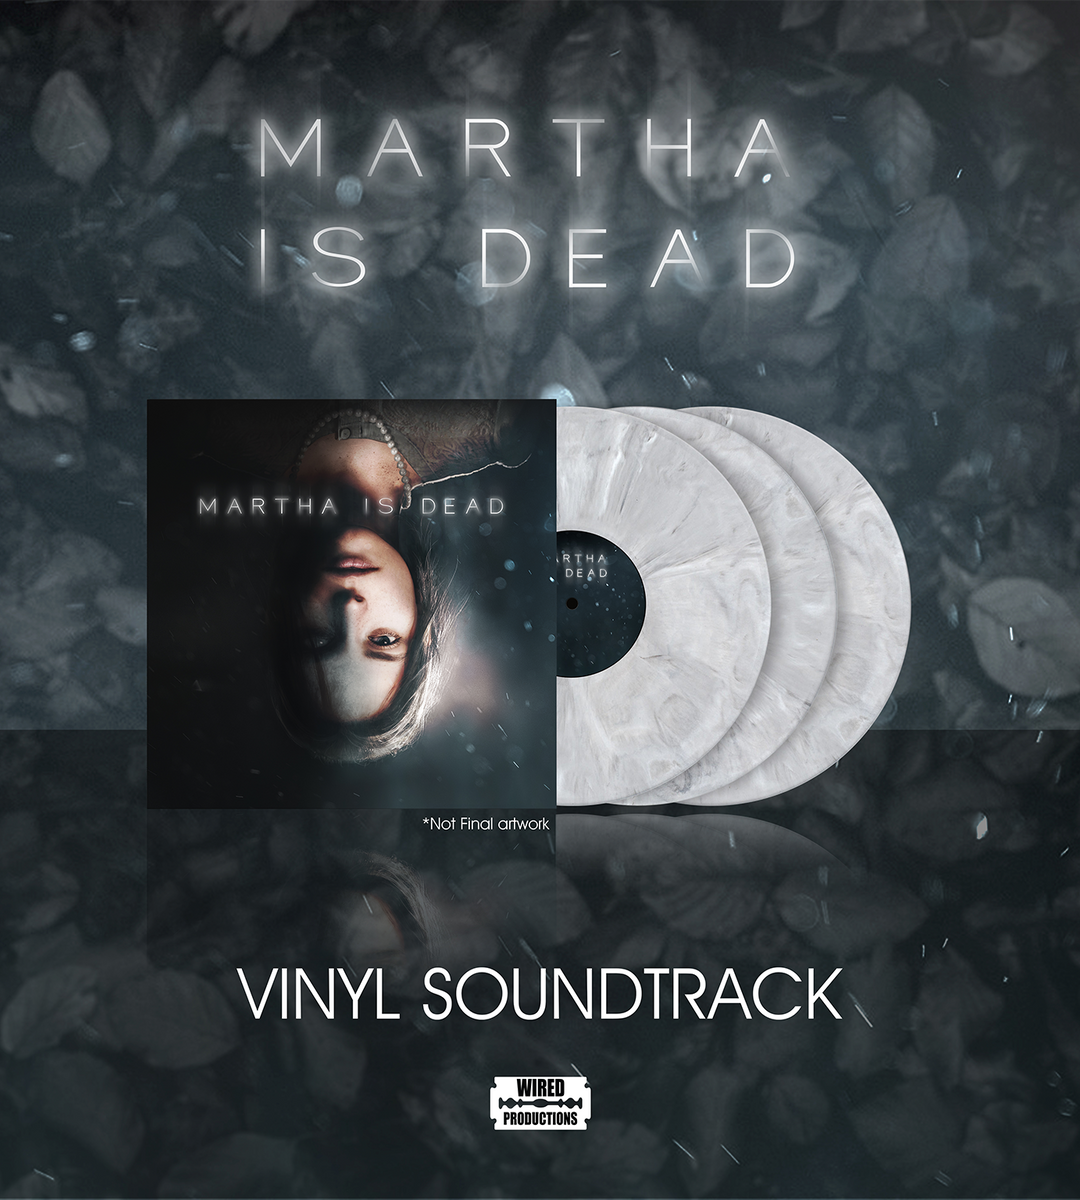 Martha Is Dead Collector's Edition PS5 – Wired Productions